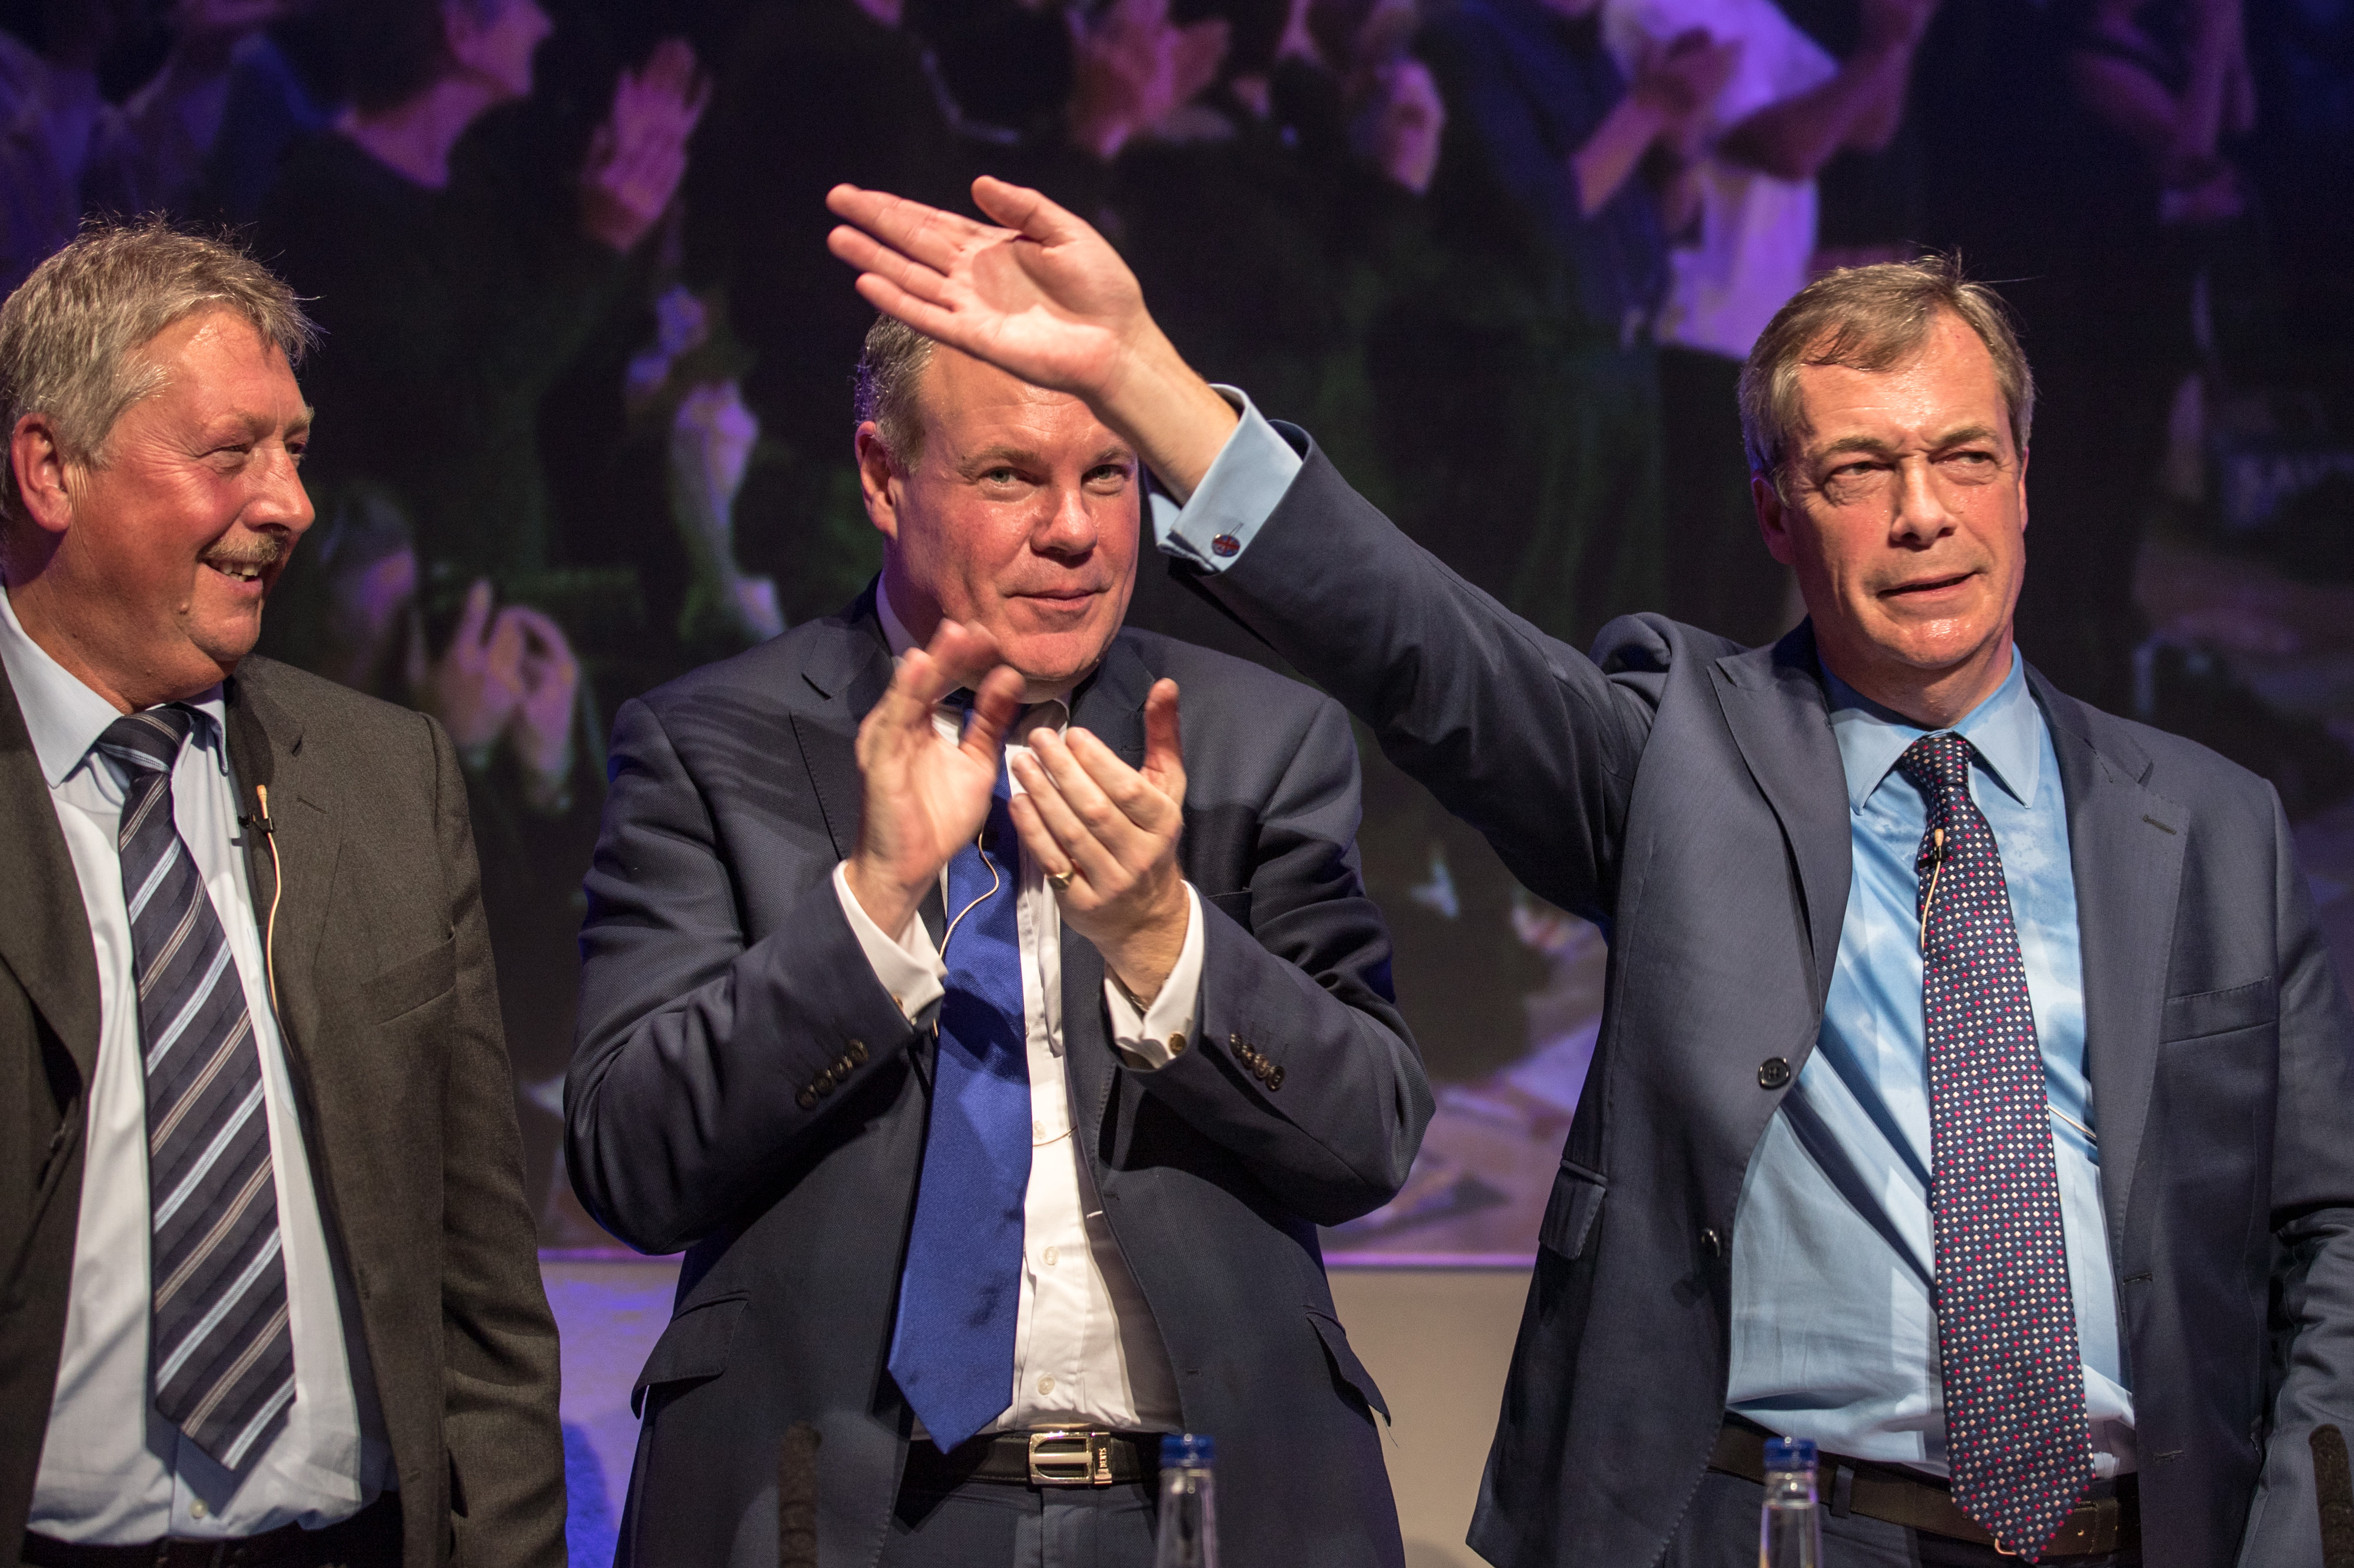 A woman went viral for rolling her eyes at Nigel Farage during a debate. (Photo by Matt Cardy/Getty Images) (Matt Cardy&mdash;Getty Images)